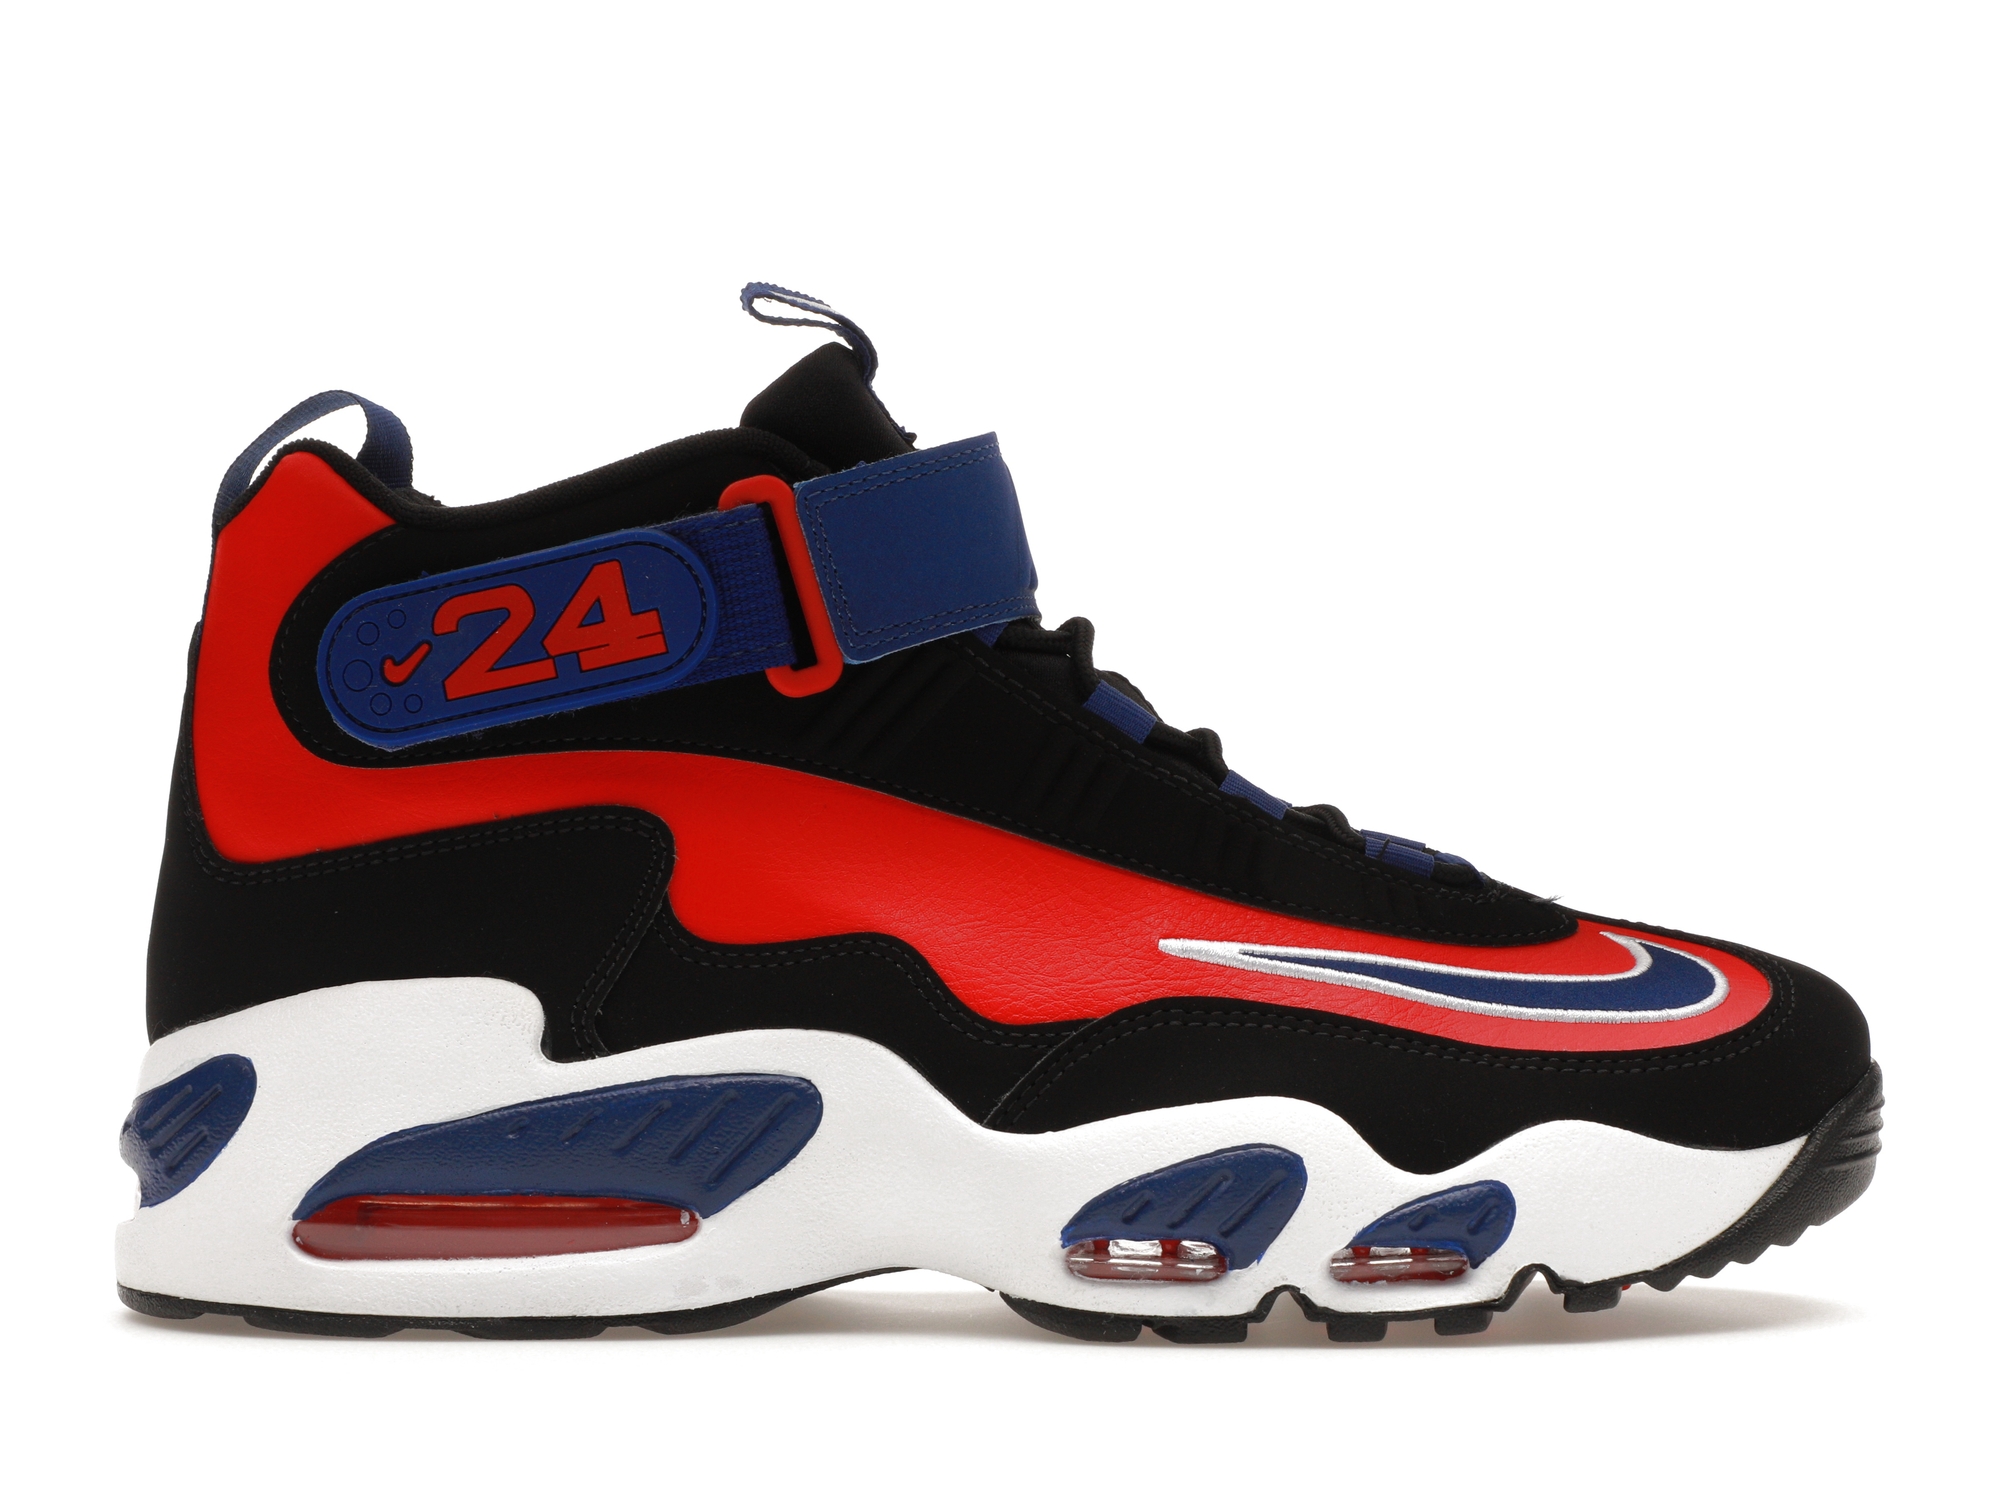 Nike honors Ken Griffey Jr. and Sr. with…